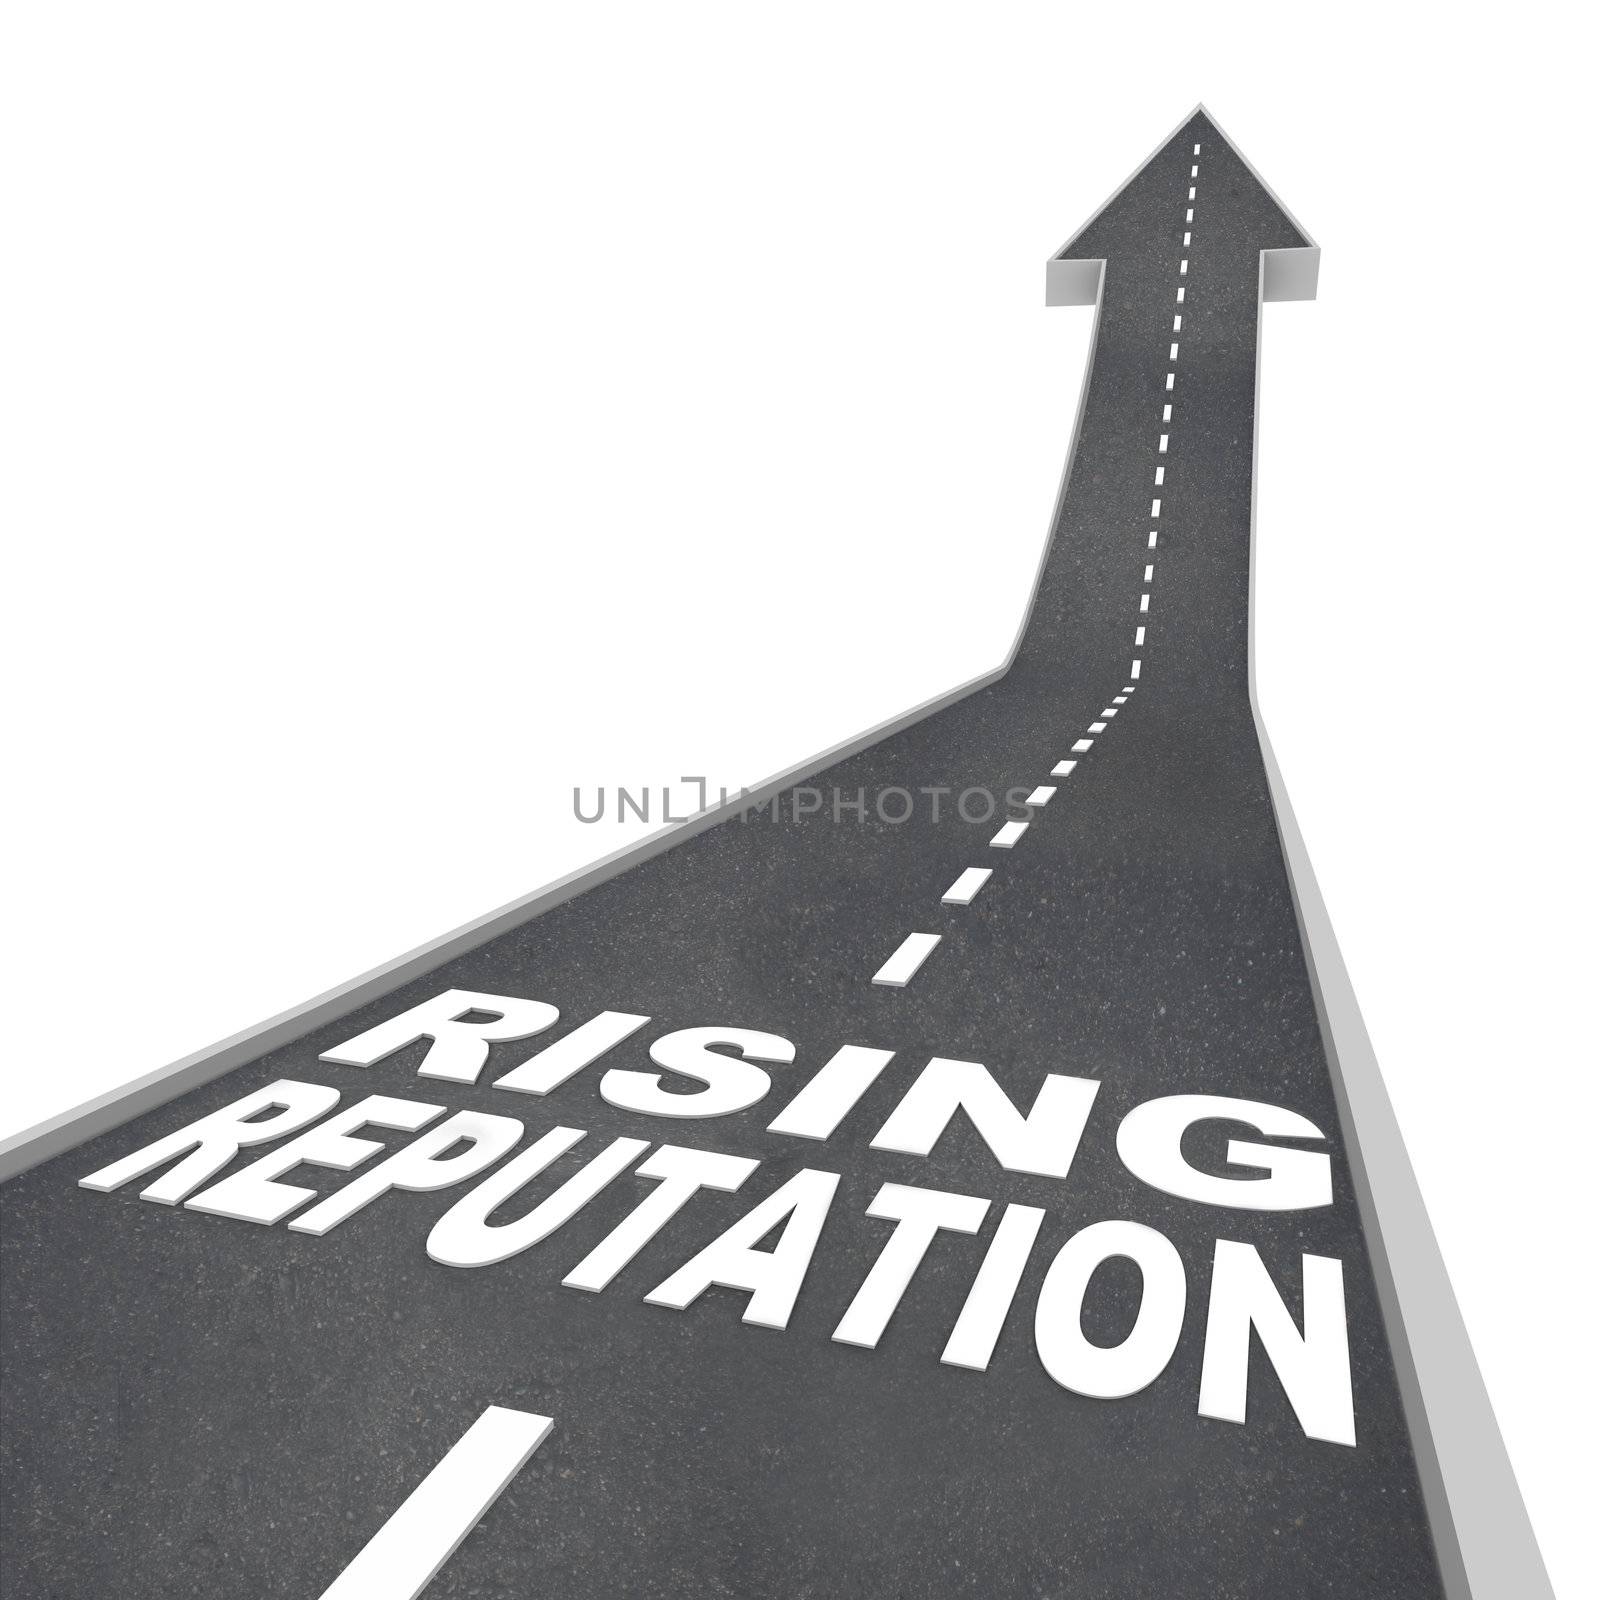 The words Rising Reputation on a road leading higher with an arrow pointing up, symbolizing an improving standing with your audience, that you are trustworthy, credible, popular and an authority